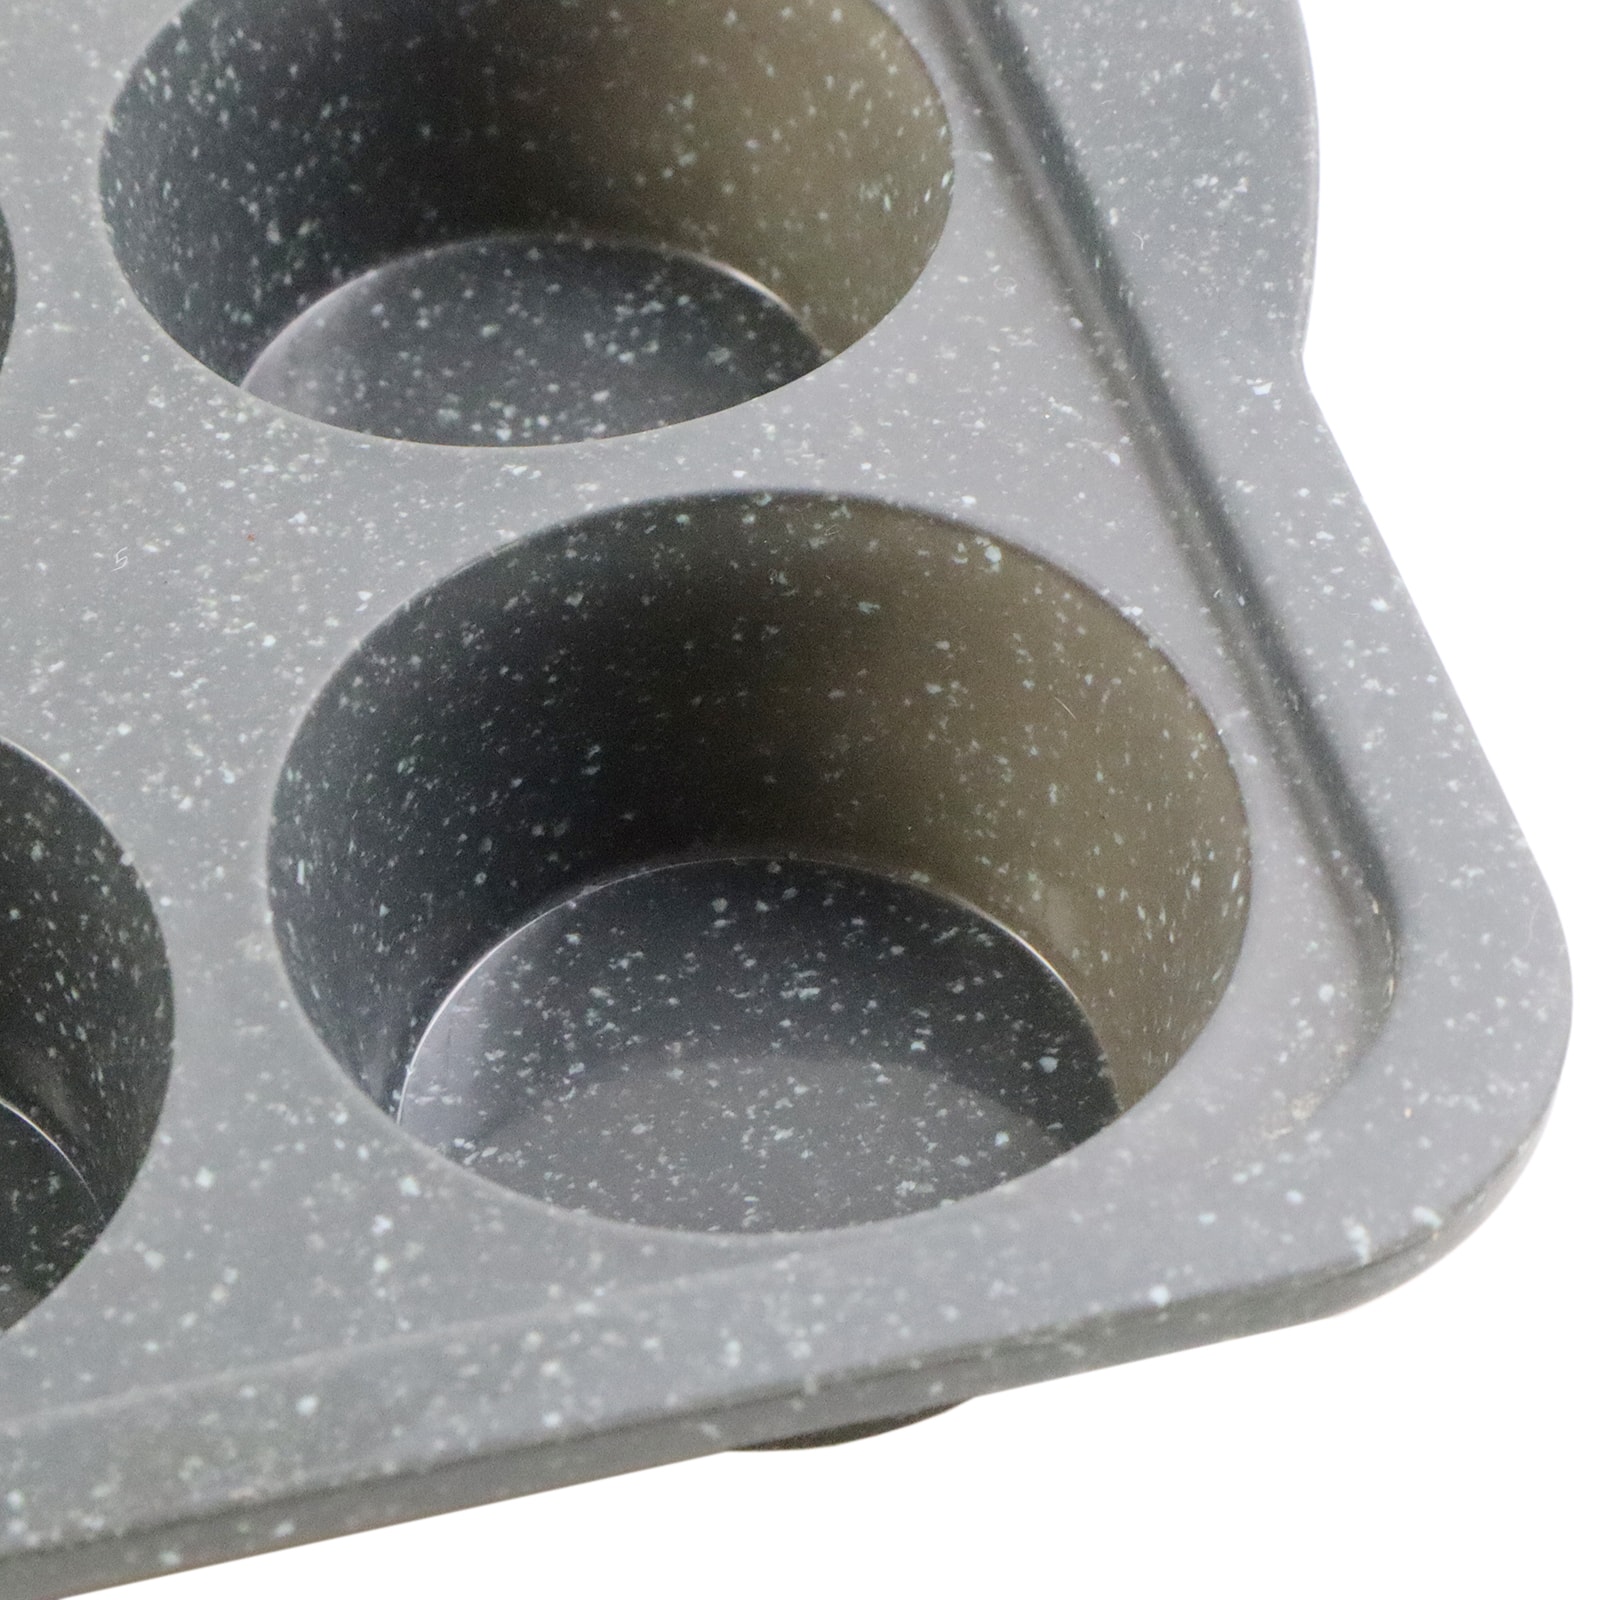 12-Cavity Metal-Reinforced Silicone Muffin Pan by Celebrate It